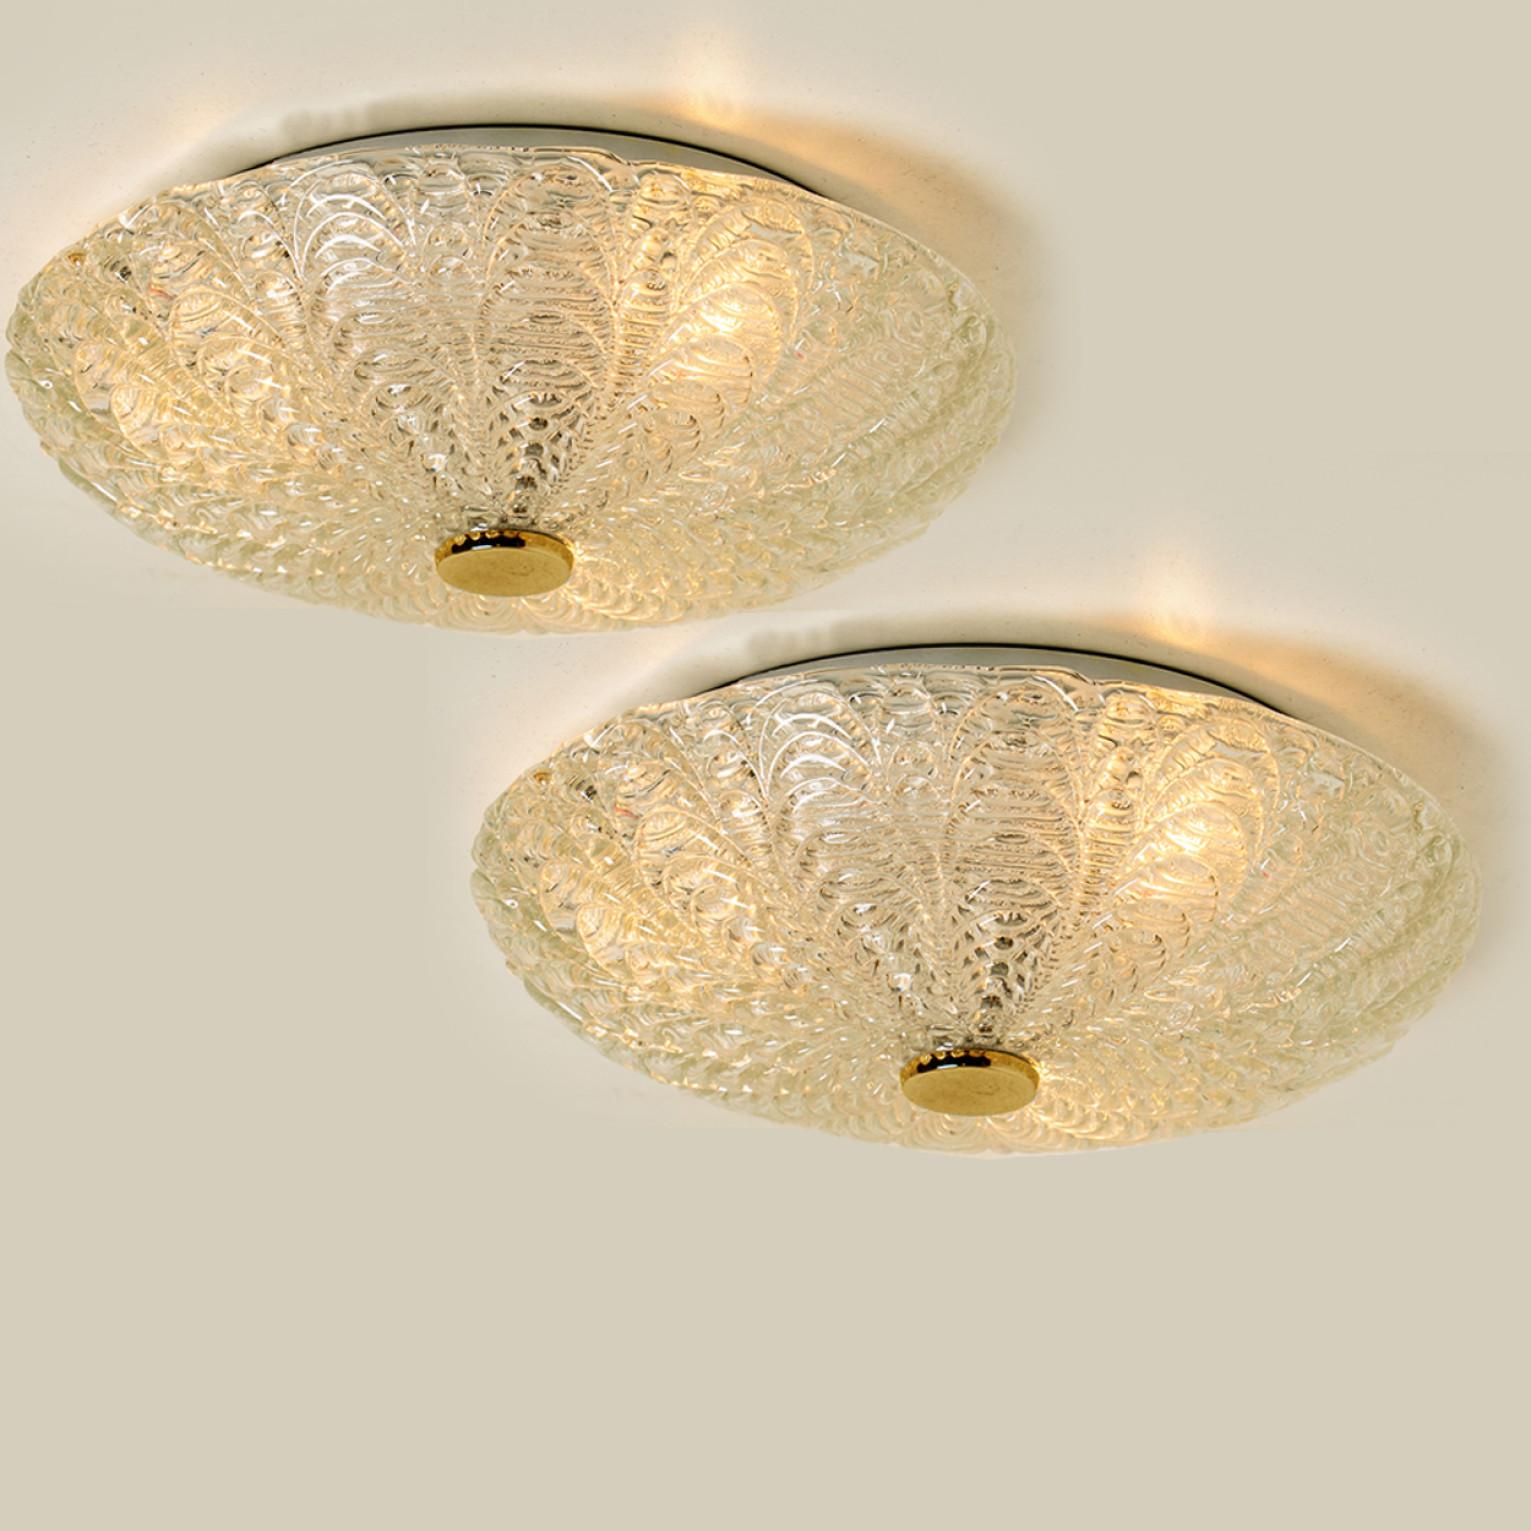 1 of the 2 high quality modern thick textured ice glass flush mount lights , (D 19.6) circa 1965. The flush mount is featuring a impressive huge round handmade glass dish. The back plate is made of white metal. Can also work for impressive wall